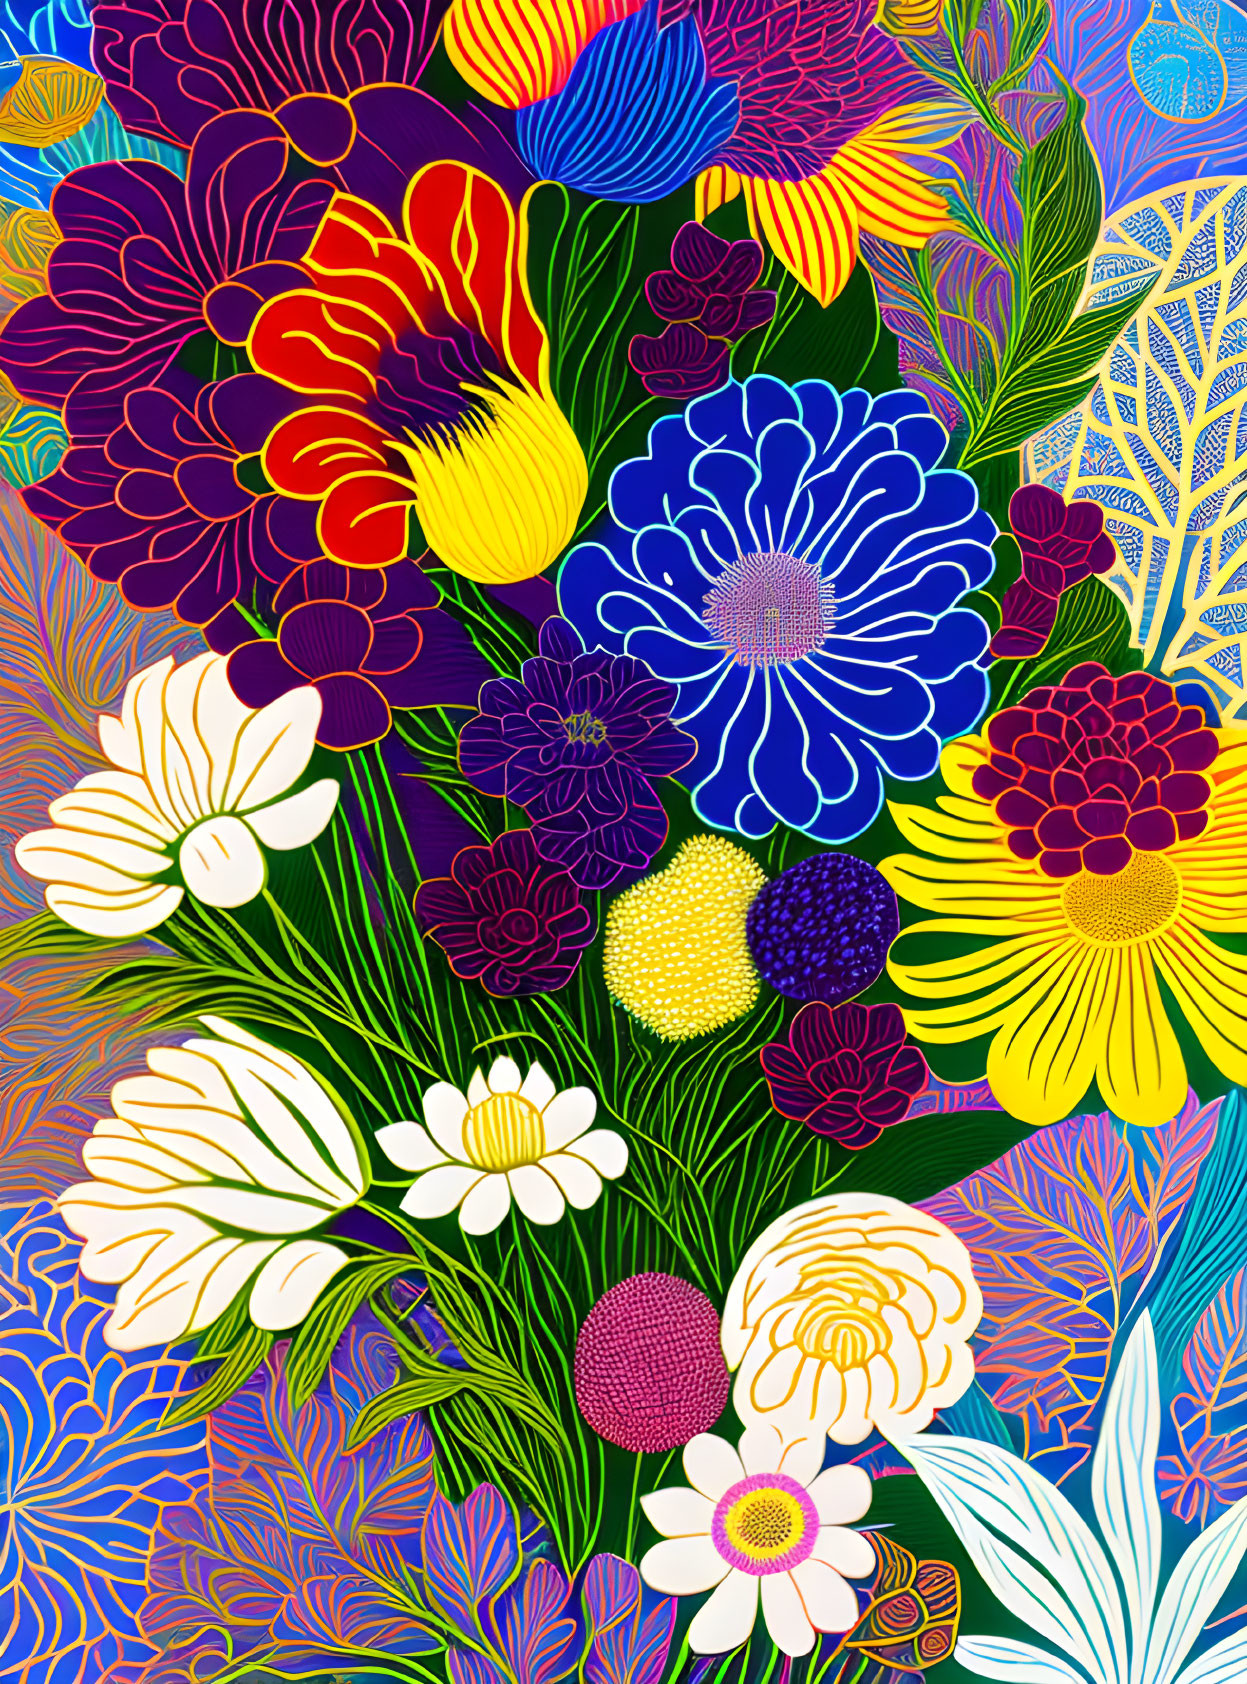 Vibrant floral illustration with intricate patterns on purple background